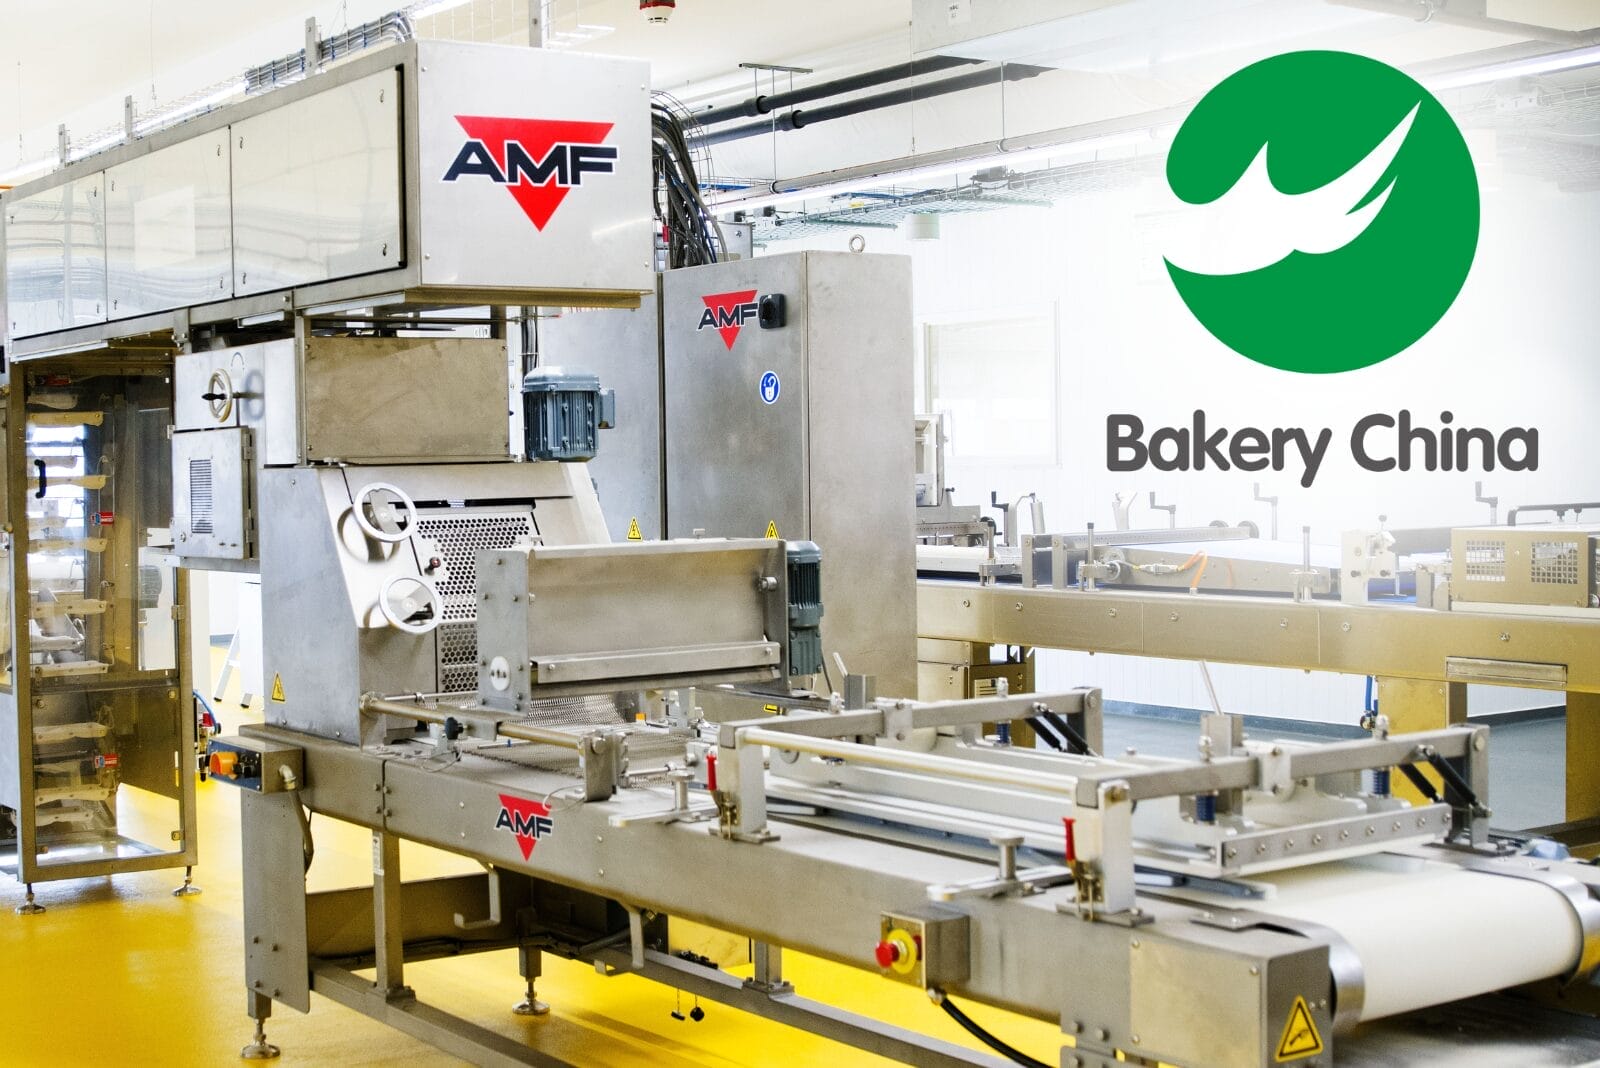 A baking system produced by AMF Bakery Systems debuted at Bakery China